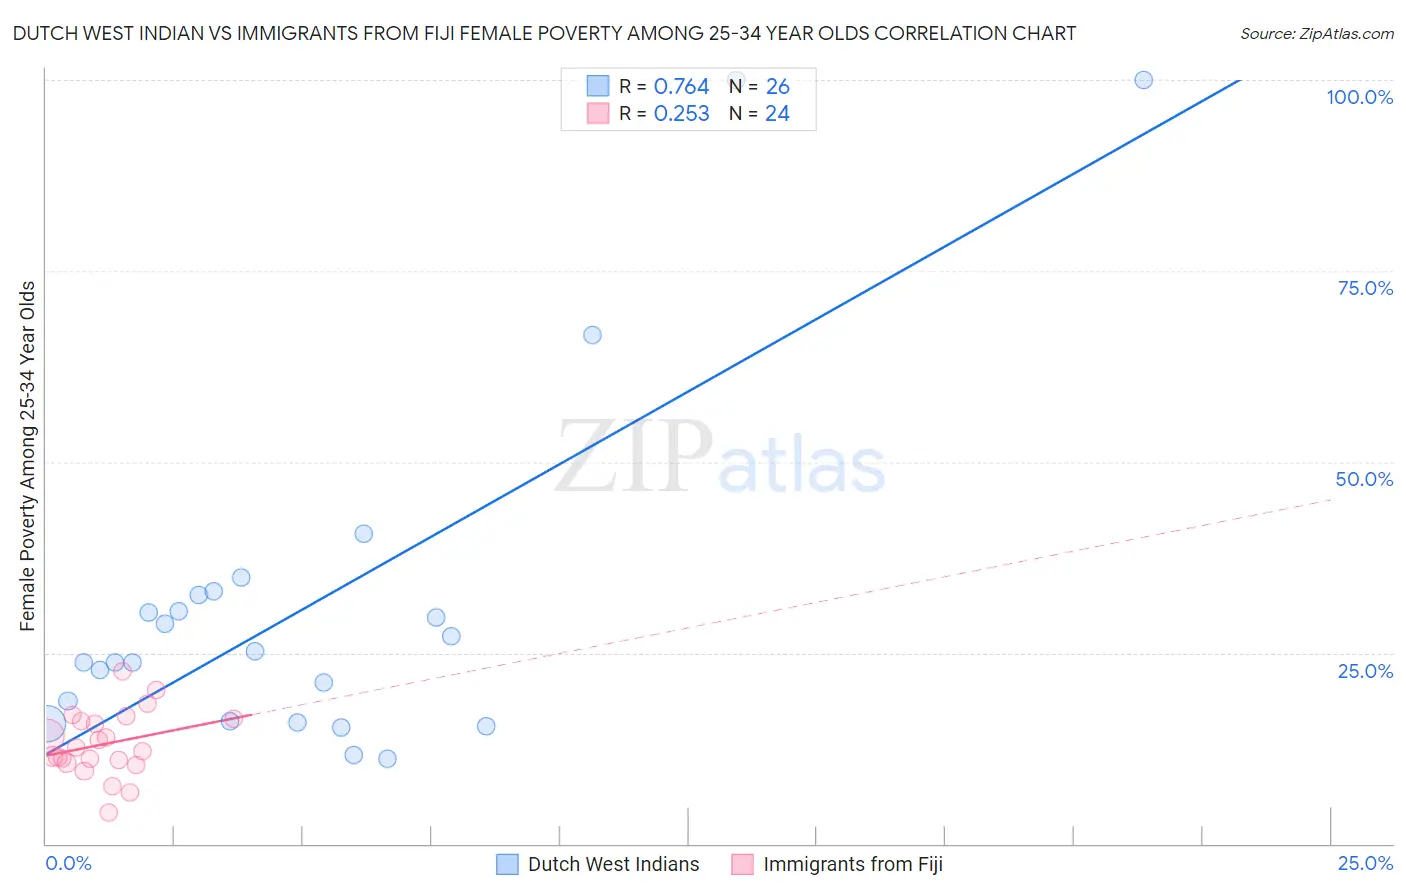 Dutch West Indian vs Immigrants from Fiji Female Poverty Among 25-34 Year Olds